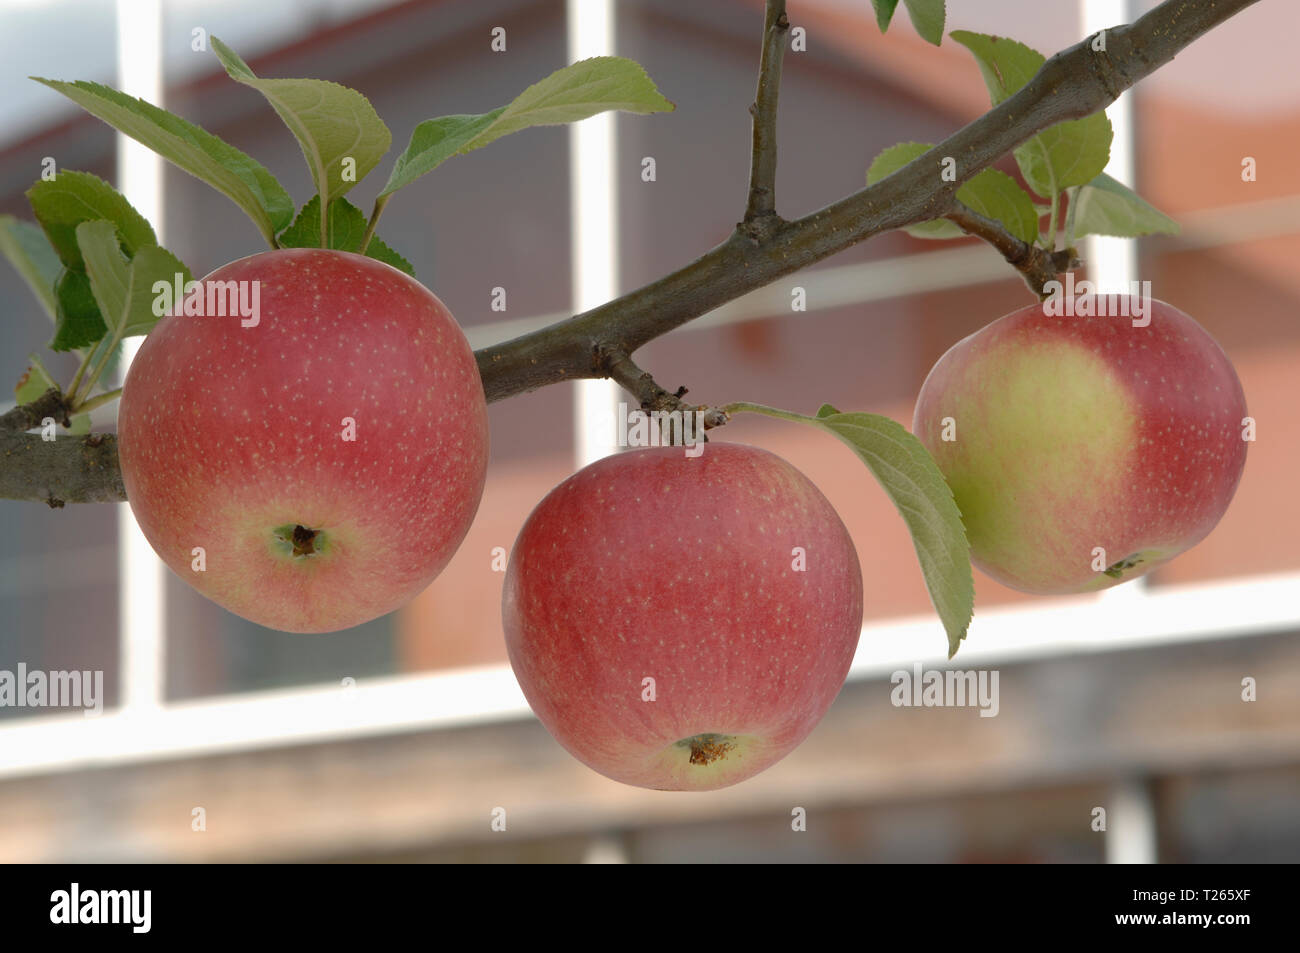 Raw Red Organic Envy Apples Stock Image - Image of delicious, snack:  129301291